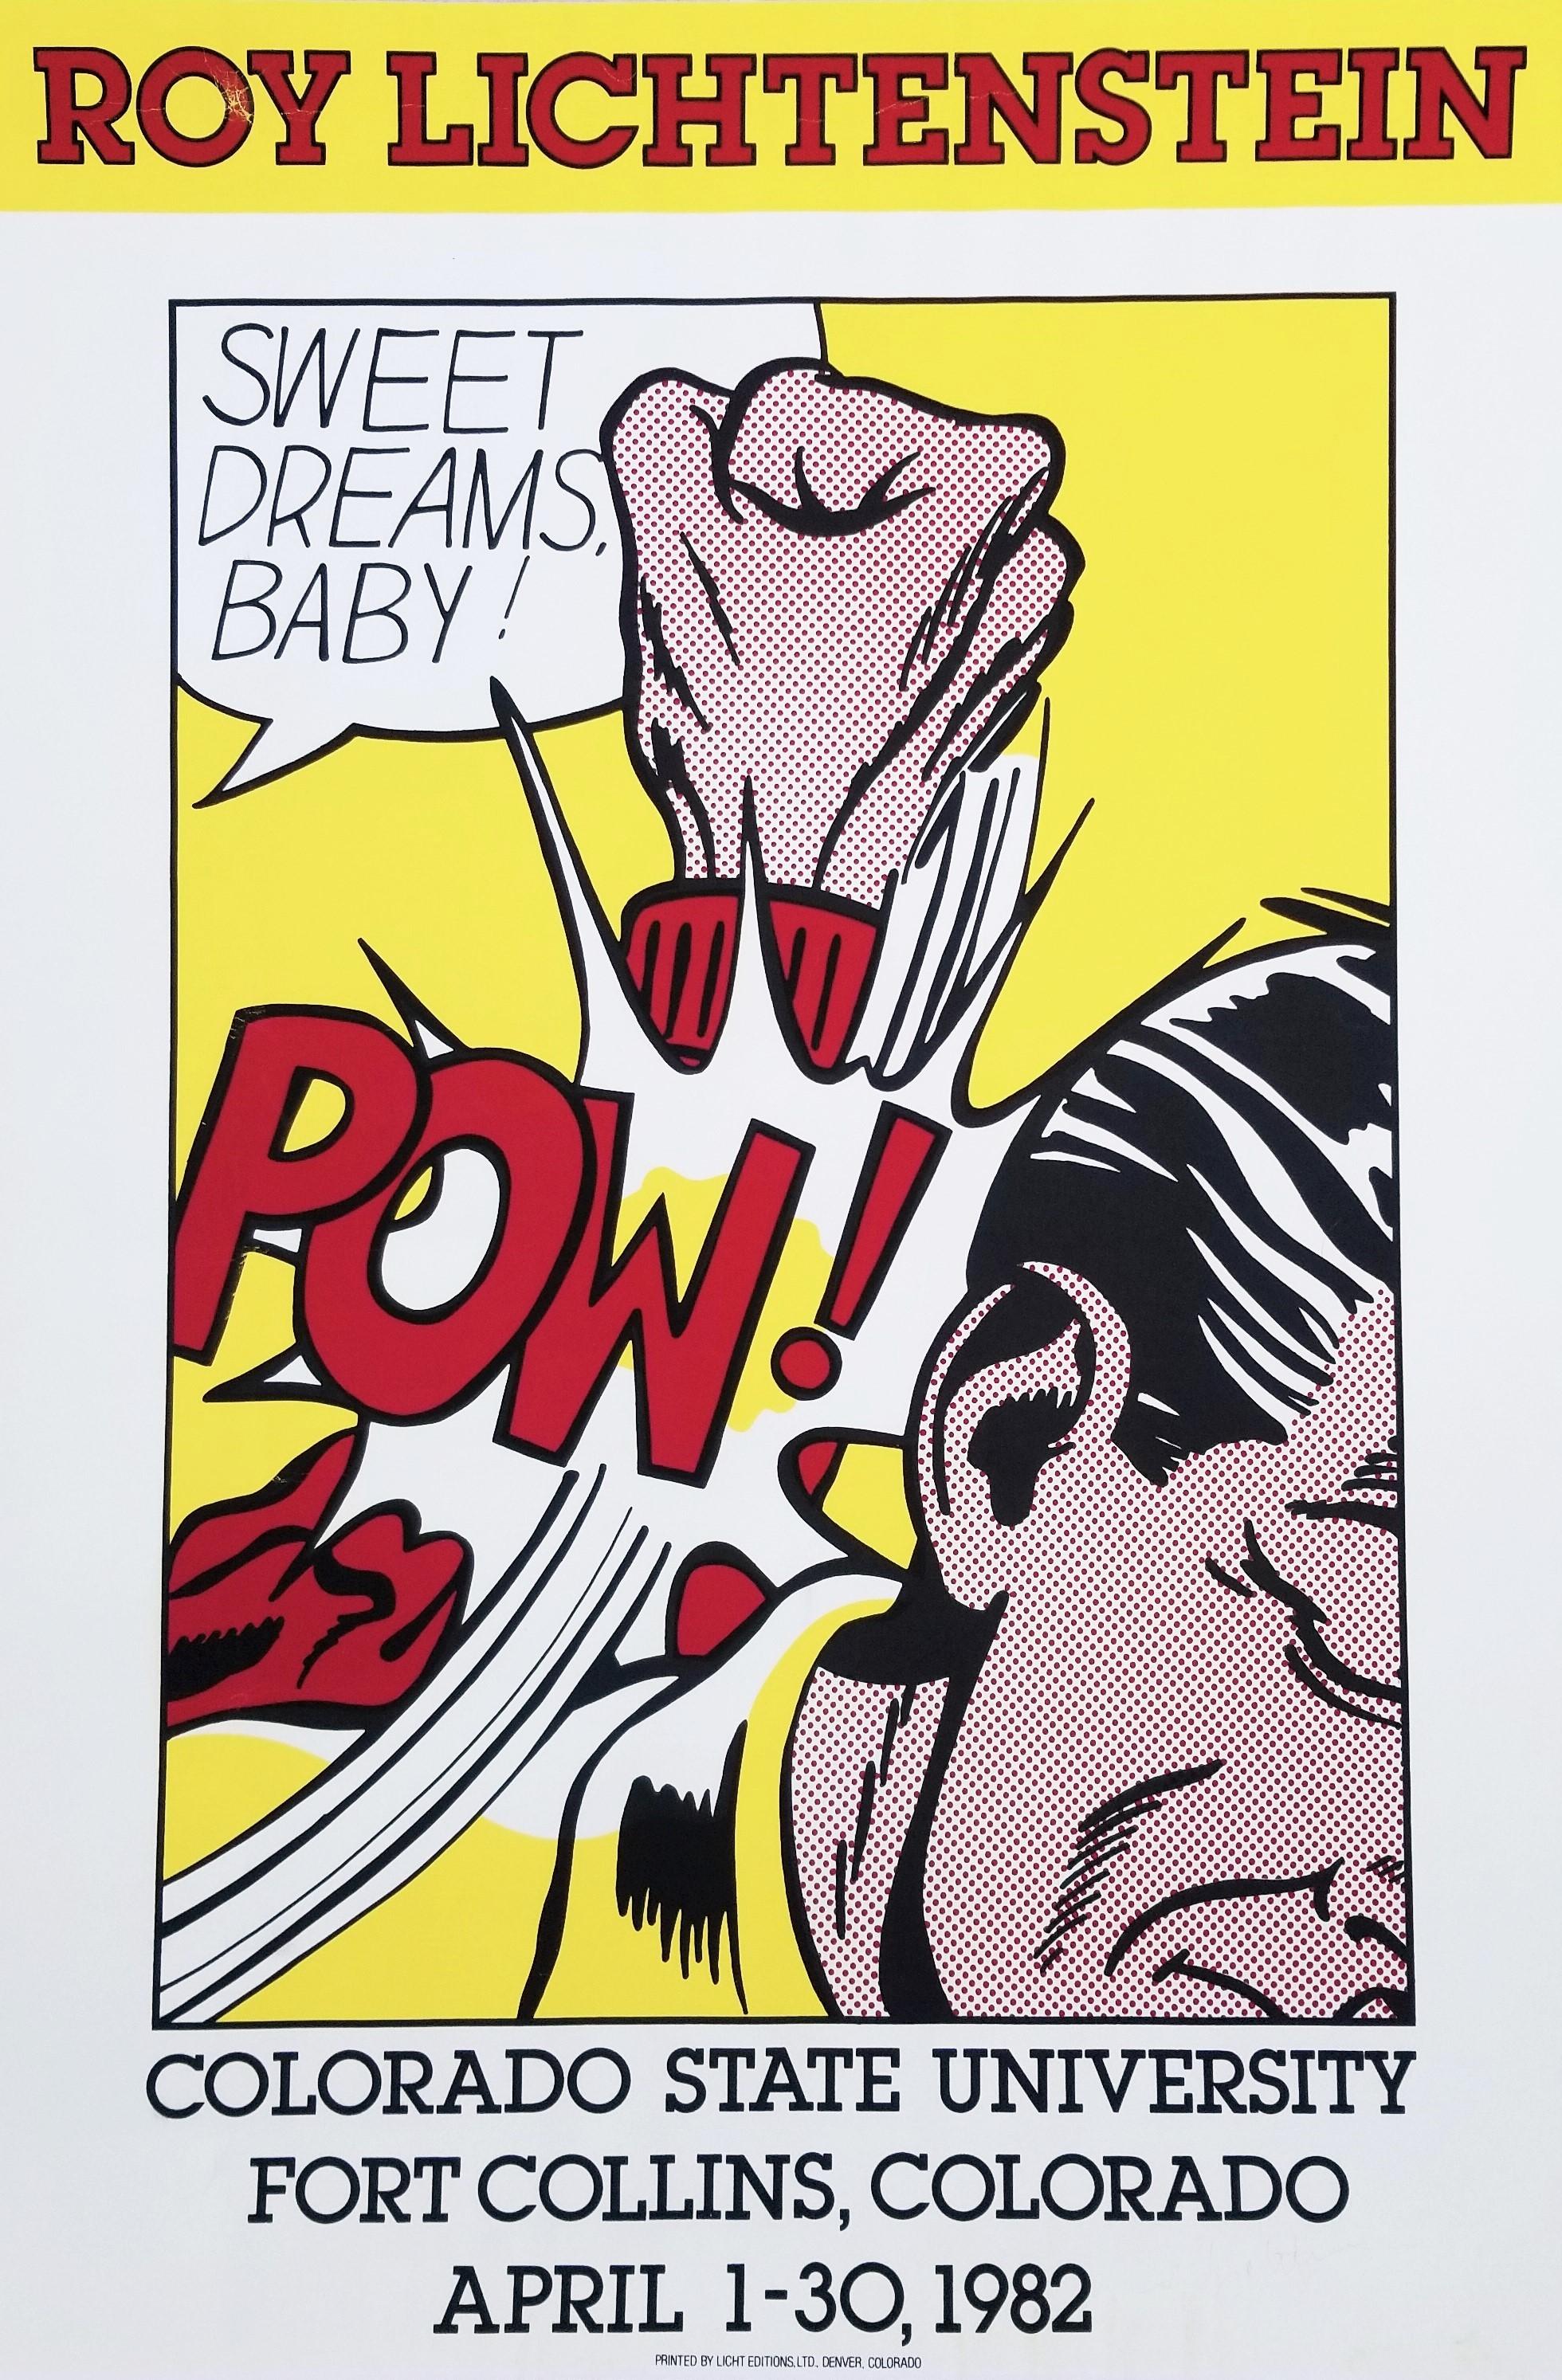 Roy Lichtenstein Figurative Print - Colorado State University, Fort Collins (Sweet Dreams Baby!) Poster (Signed)